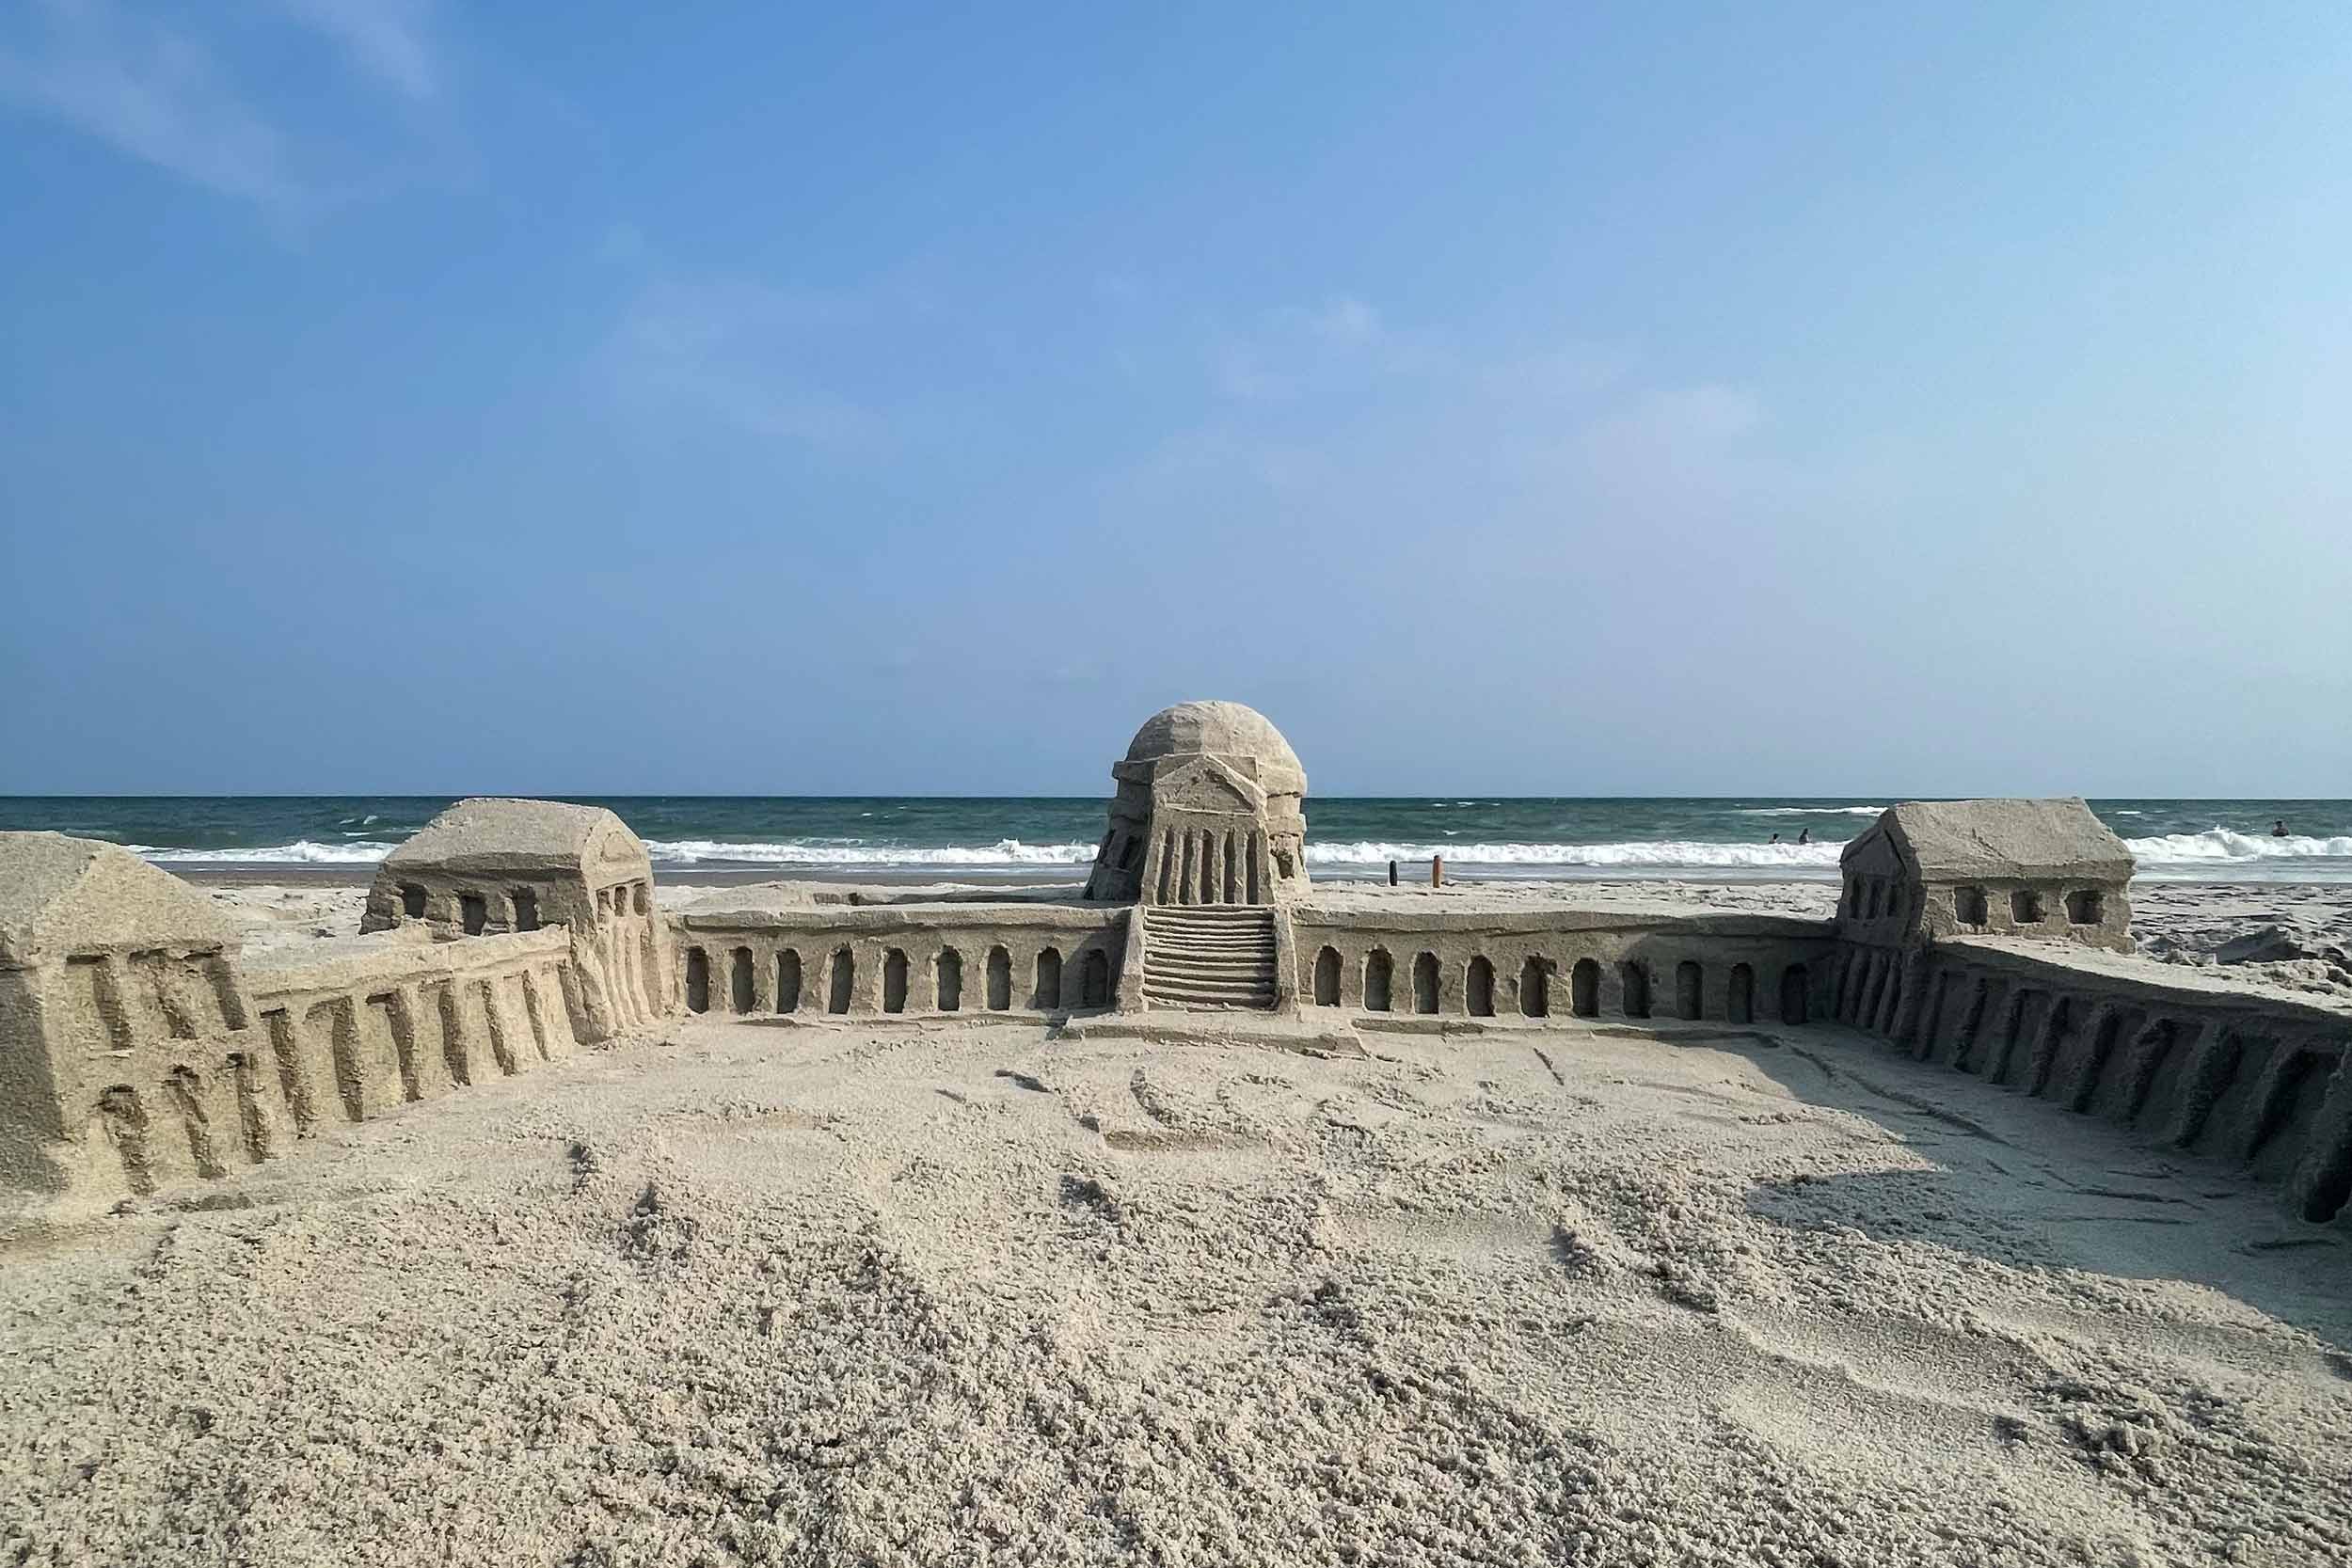 Wider view of the Rotunda/Lawn sand castle